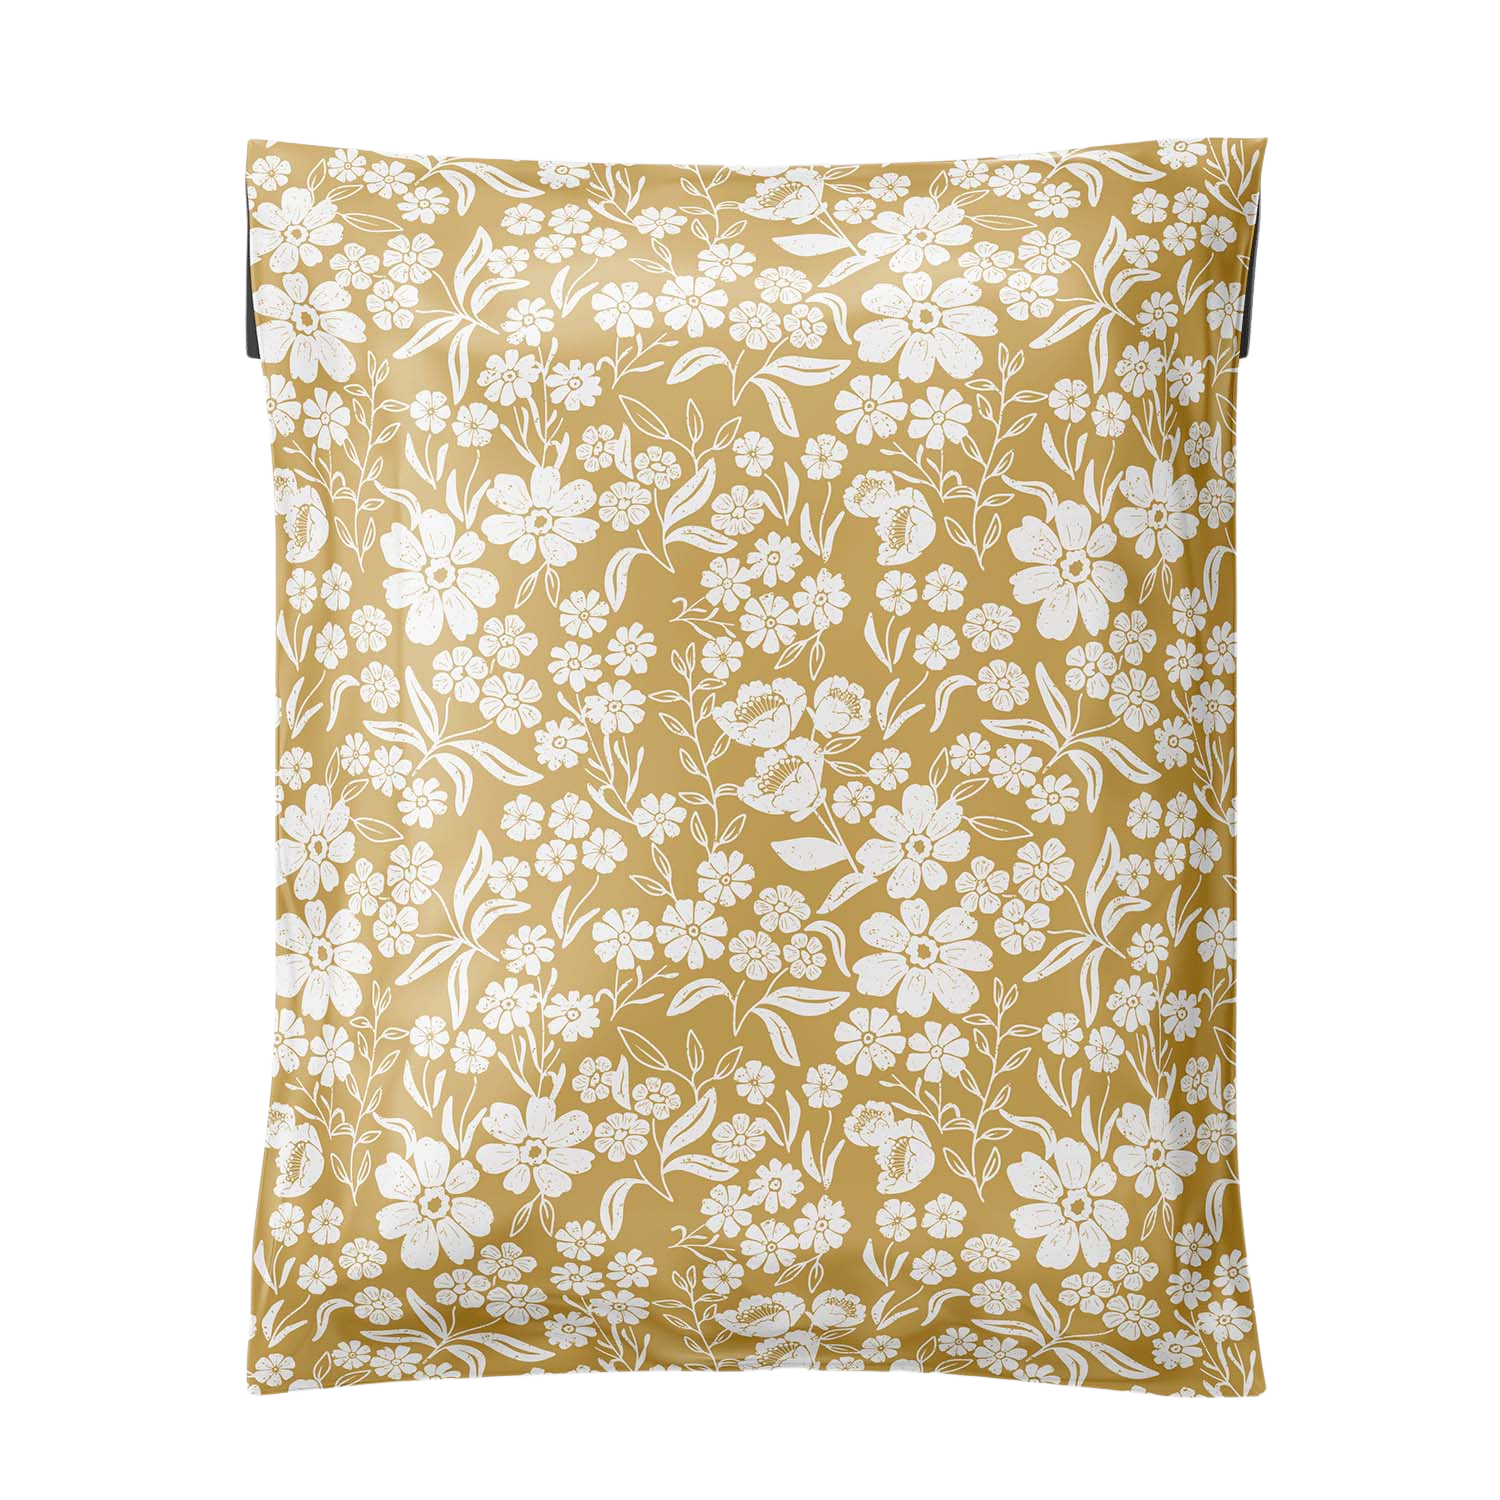 Cute Poly Mailer from Favorite Supplies. Yellow color with white floral pattern. 12x15.5 size